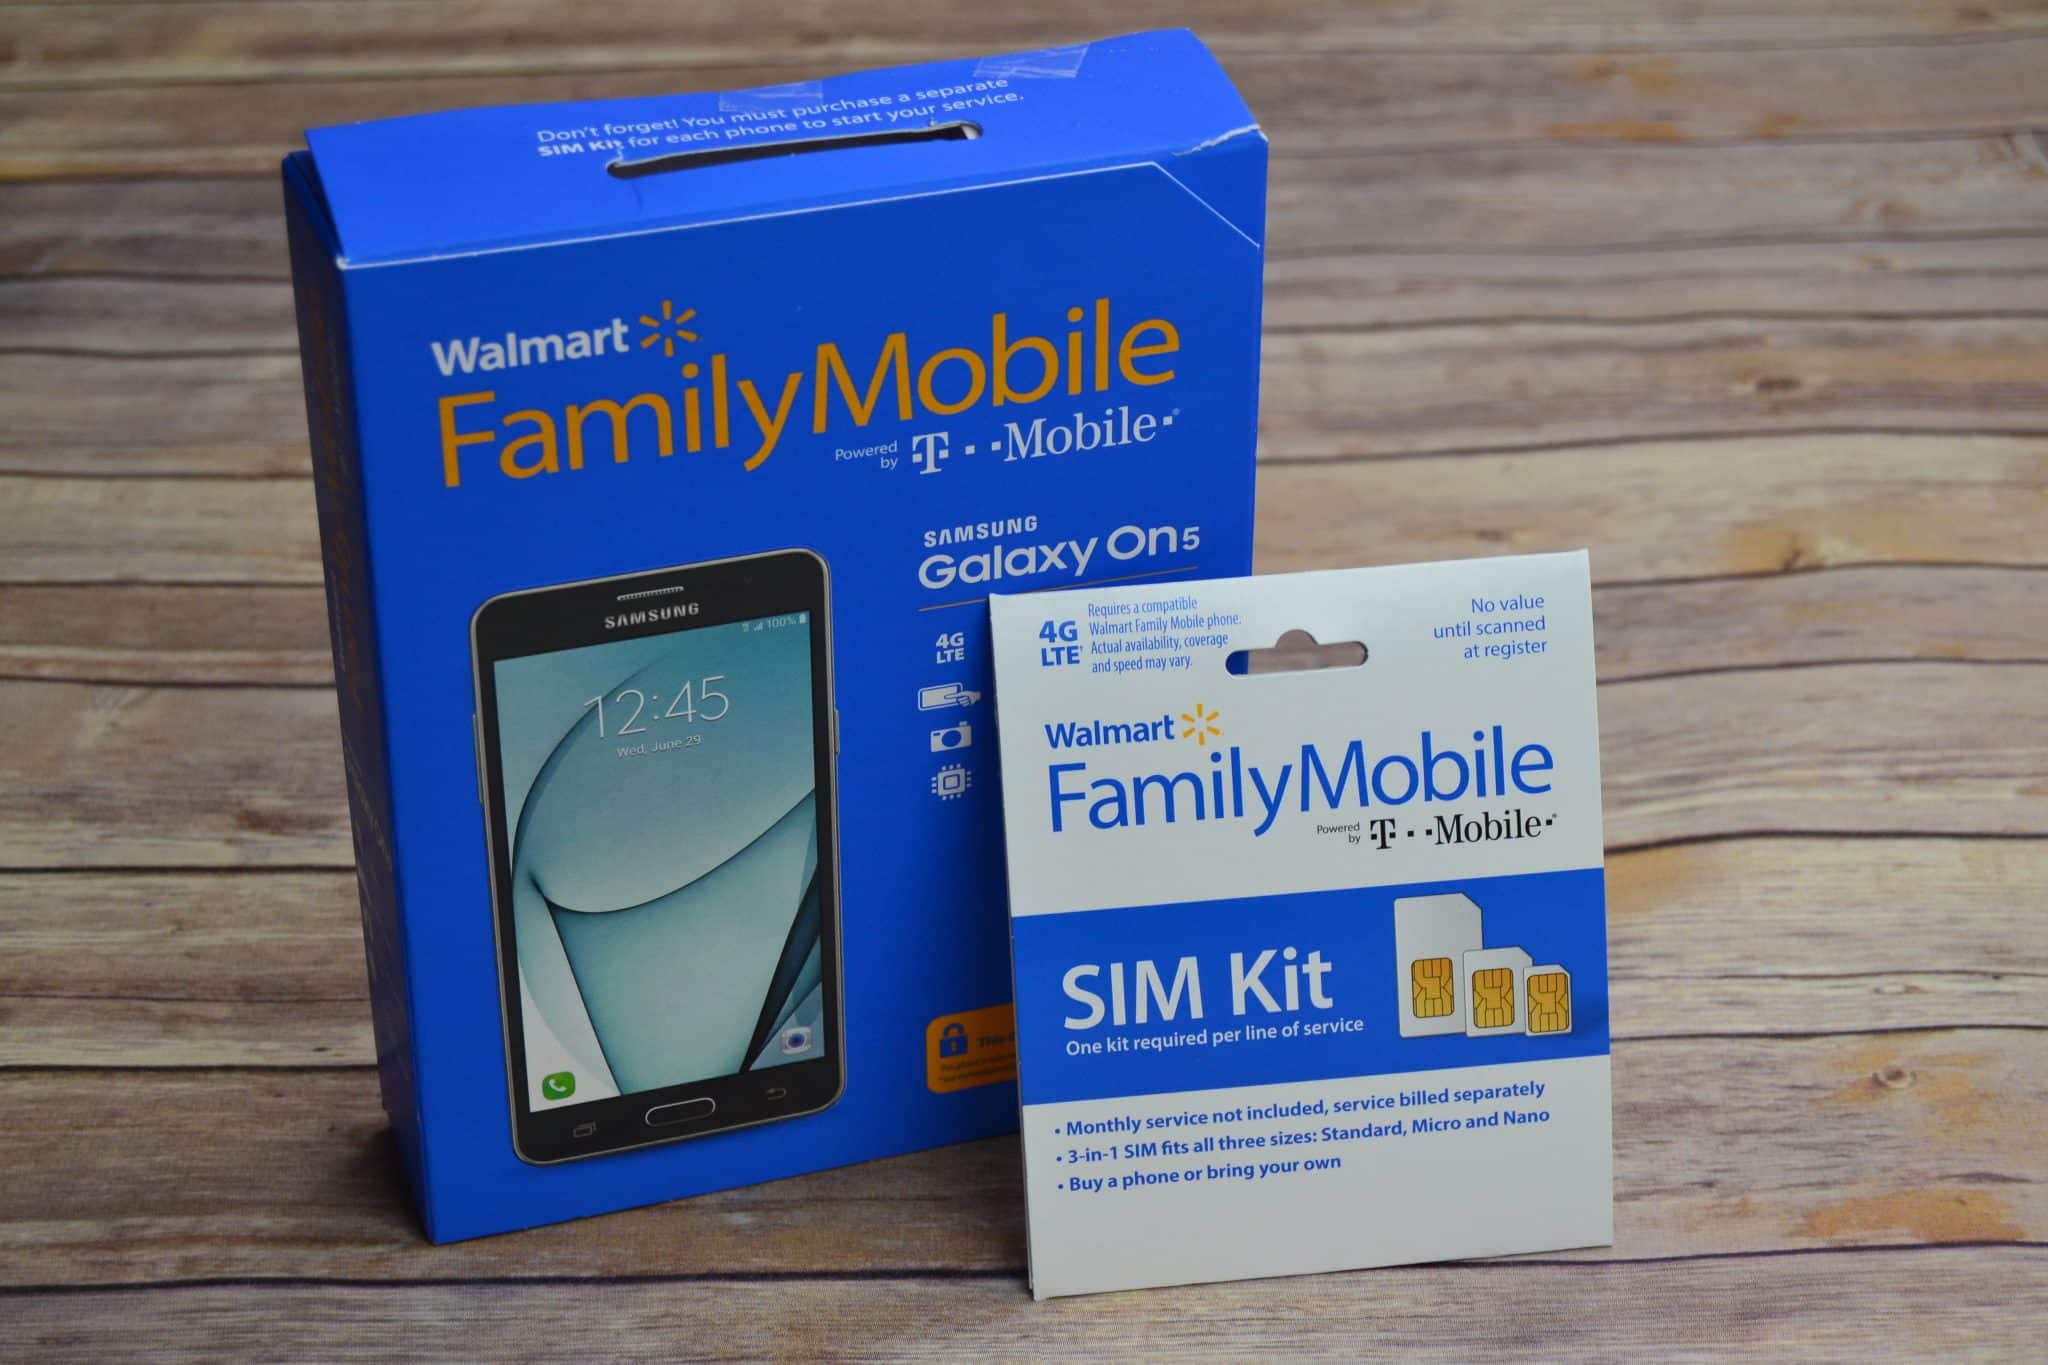 Family Movie Night with Walmart Family Mobile! #YourTaxCash @FamilyMobile